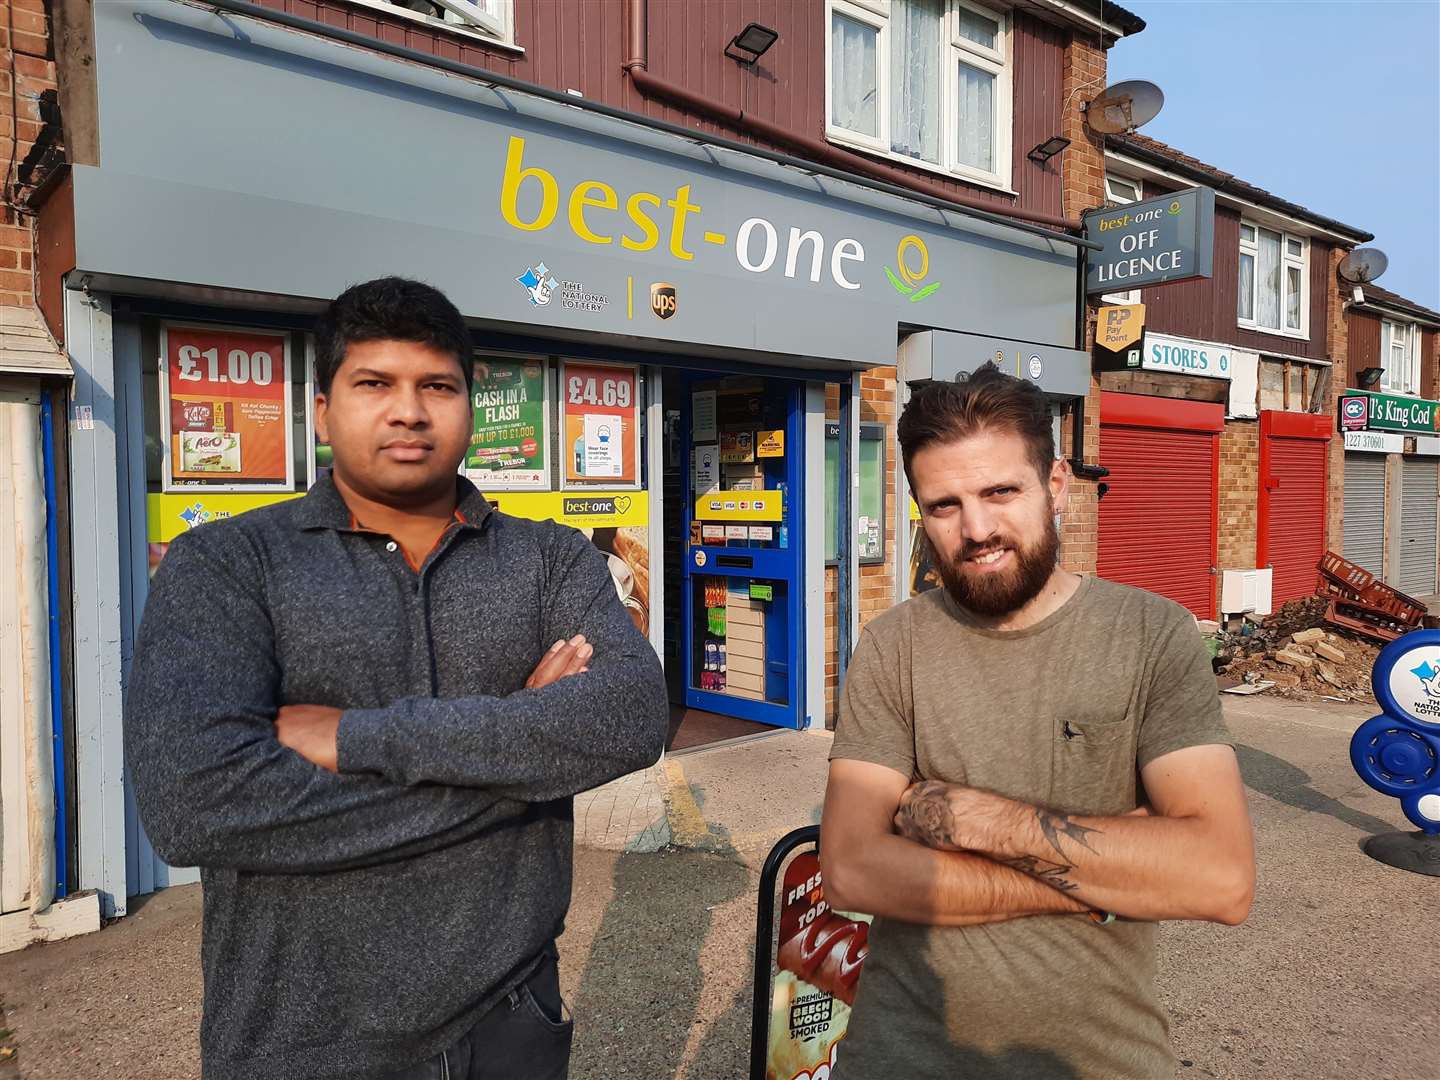 Best-One owner Velupillai Niroshan with shop assistant Rich Butcher